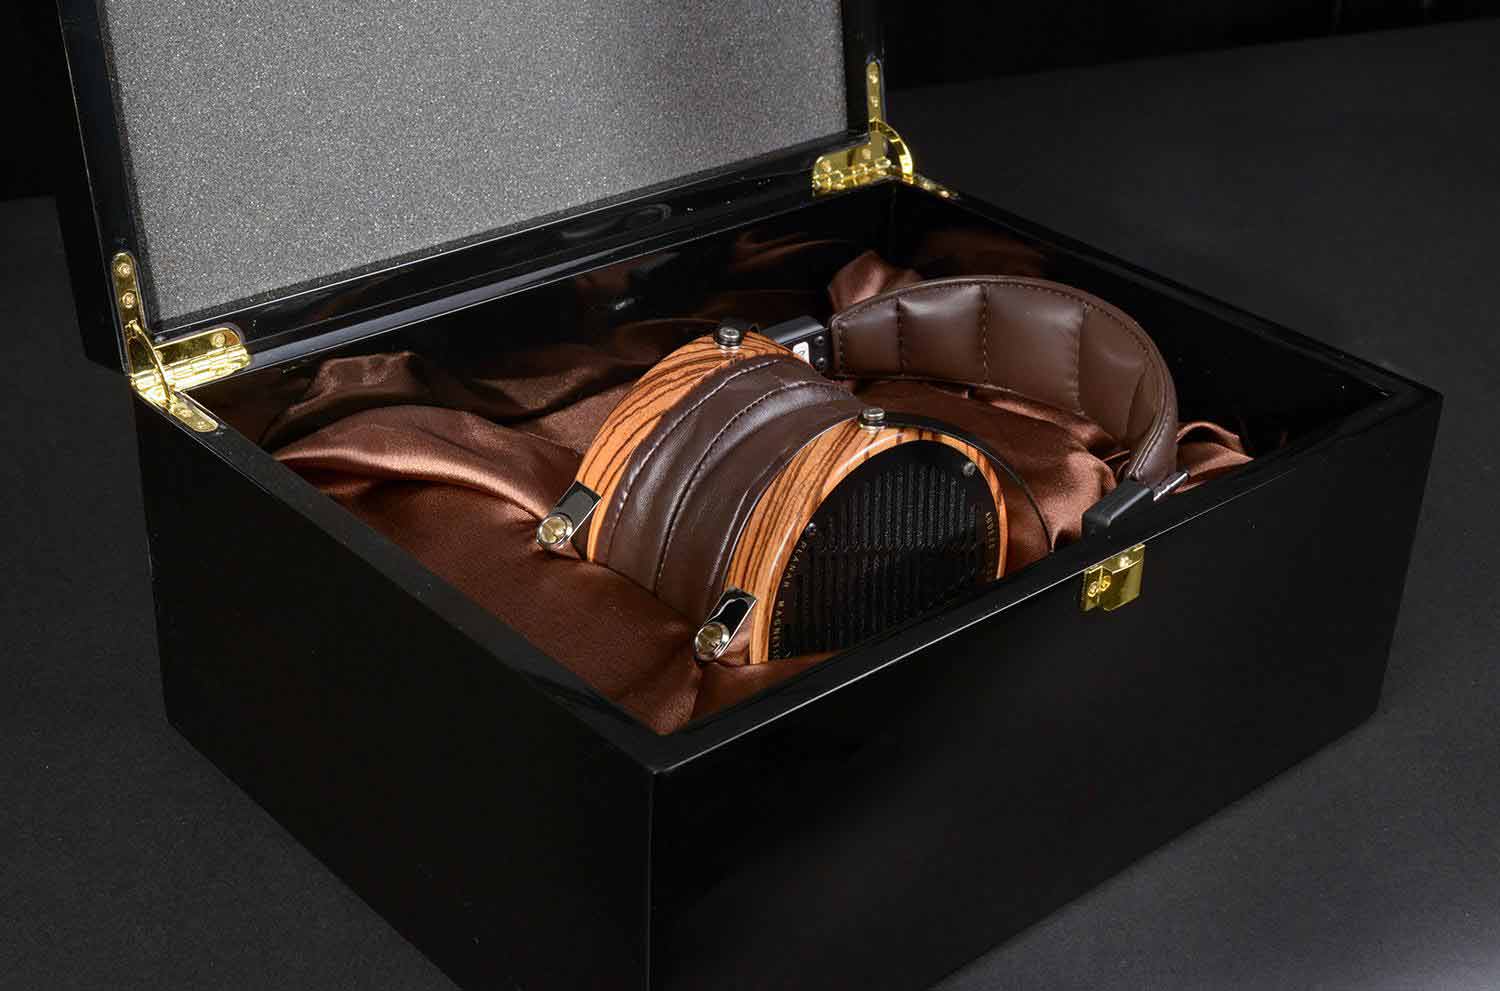 The Audeze LCD-3 in the wood box